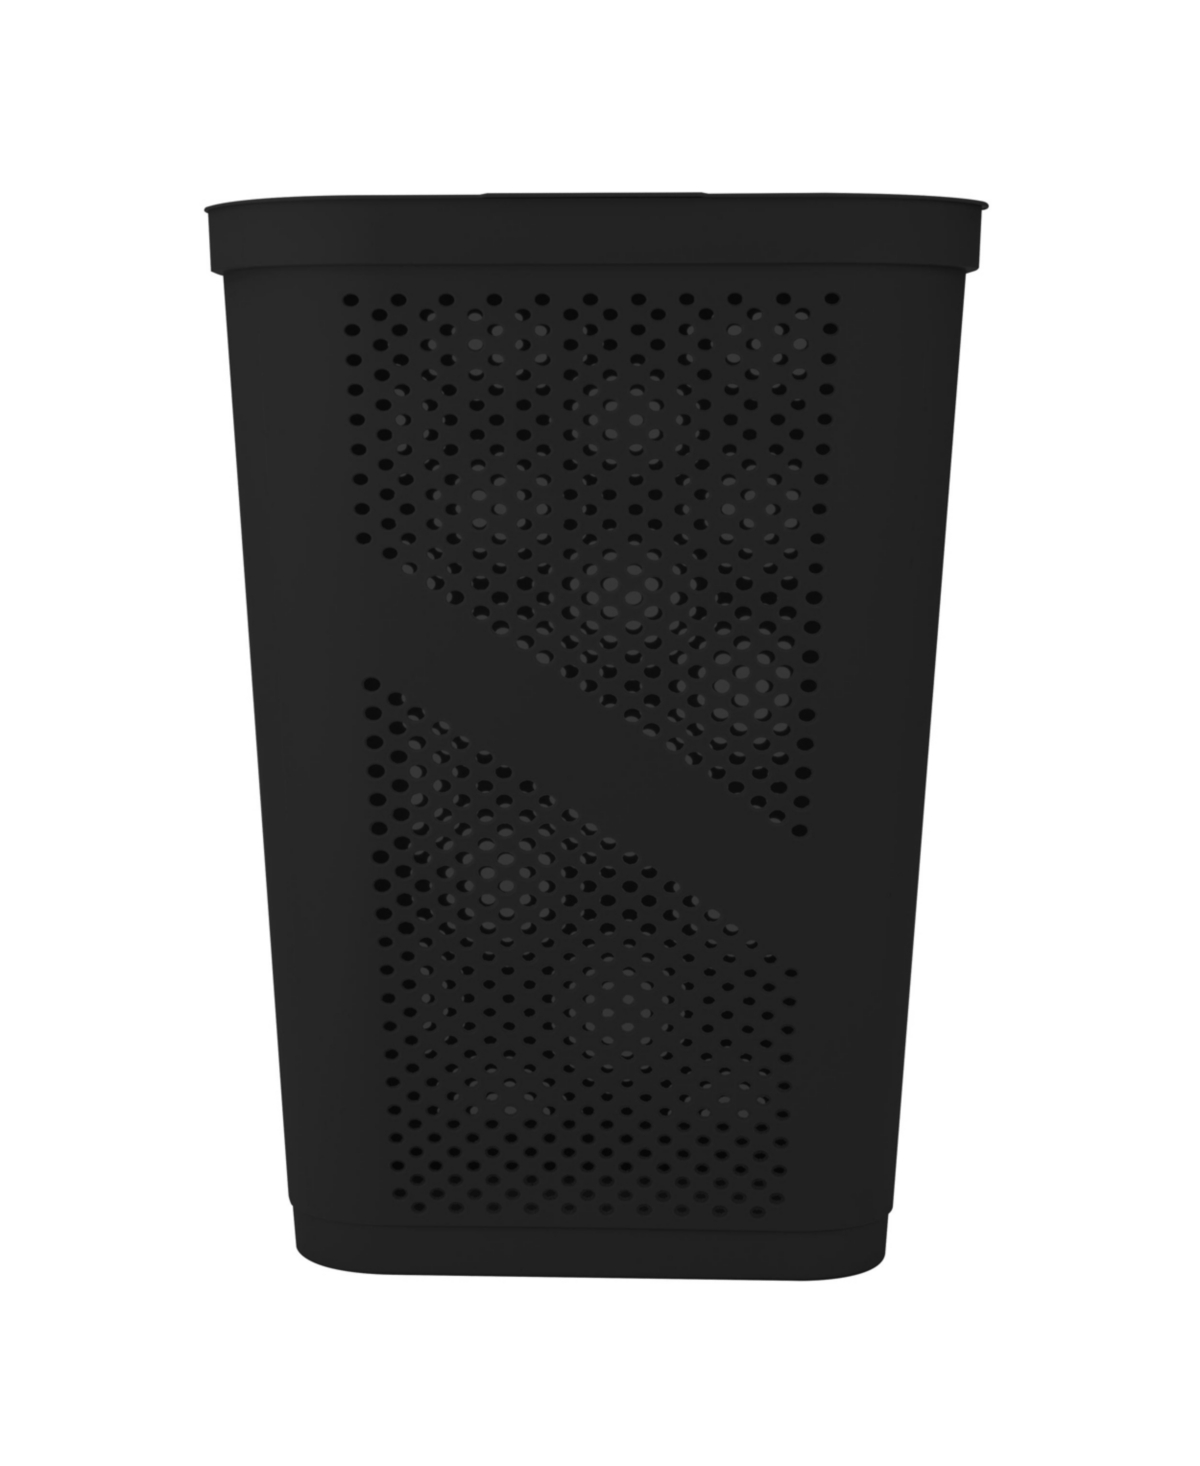 Perforated Lightweight Hamper with Lid - Black